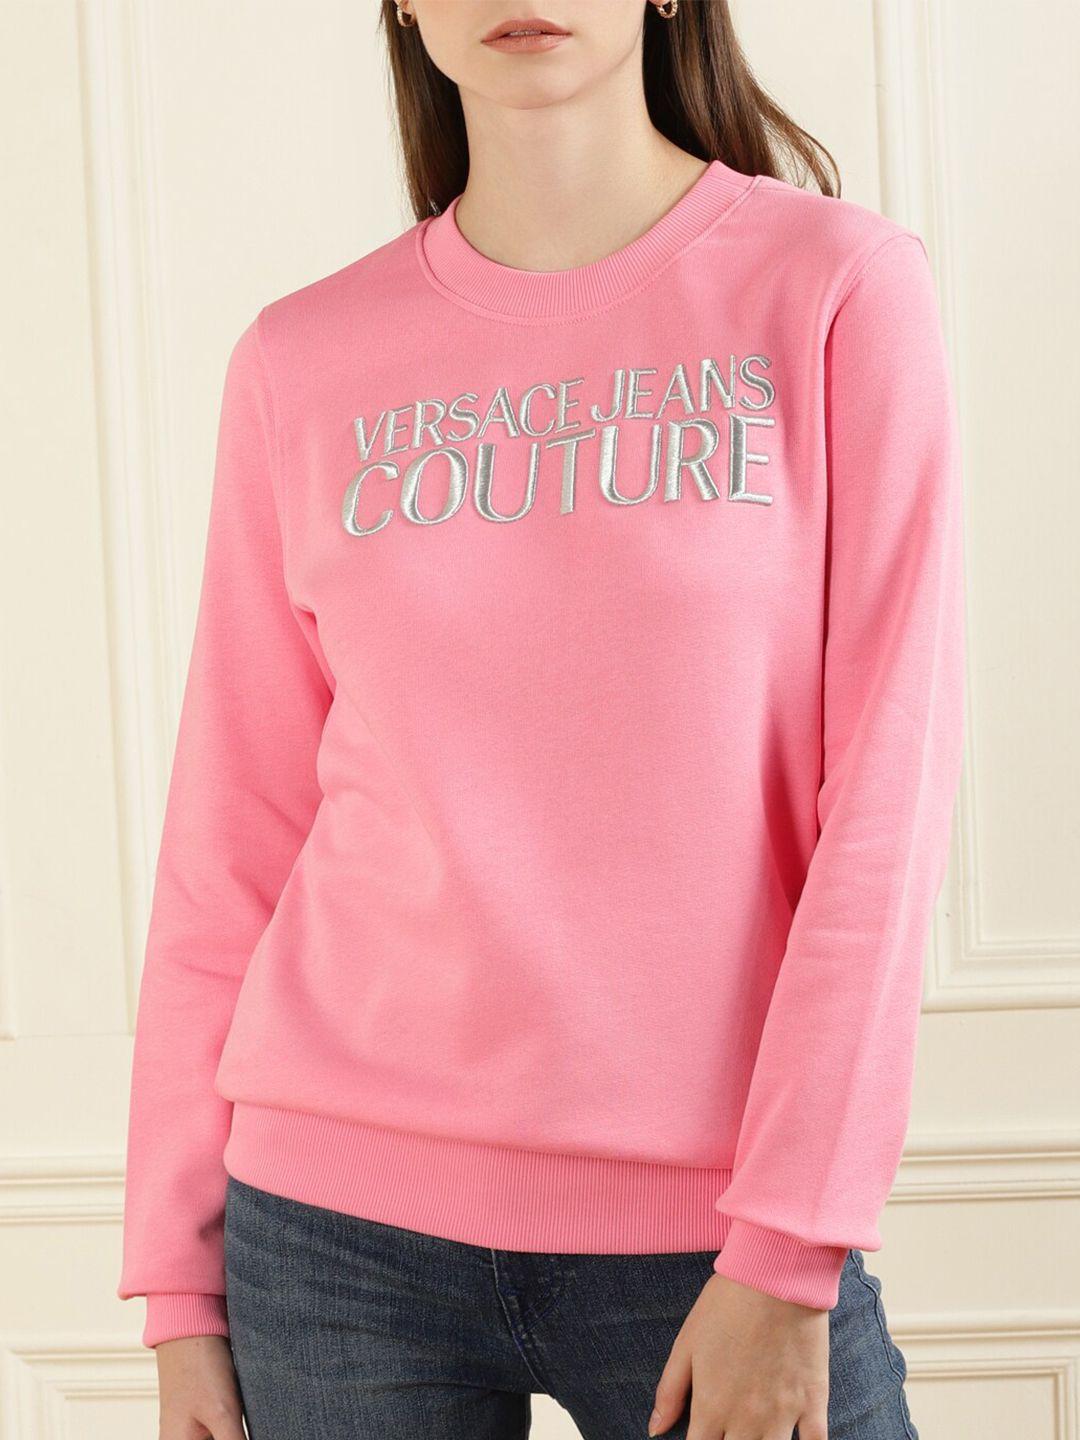 versace-jeans-couture-women-pink-vjc-brand-embroidered-pure-cotton-sweatshirt